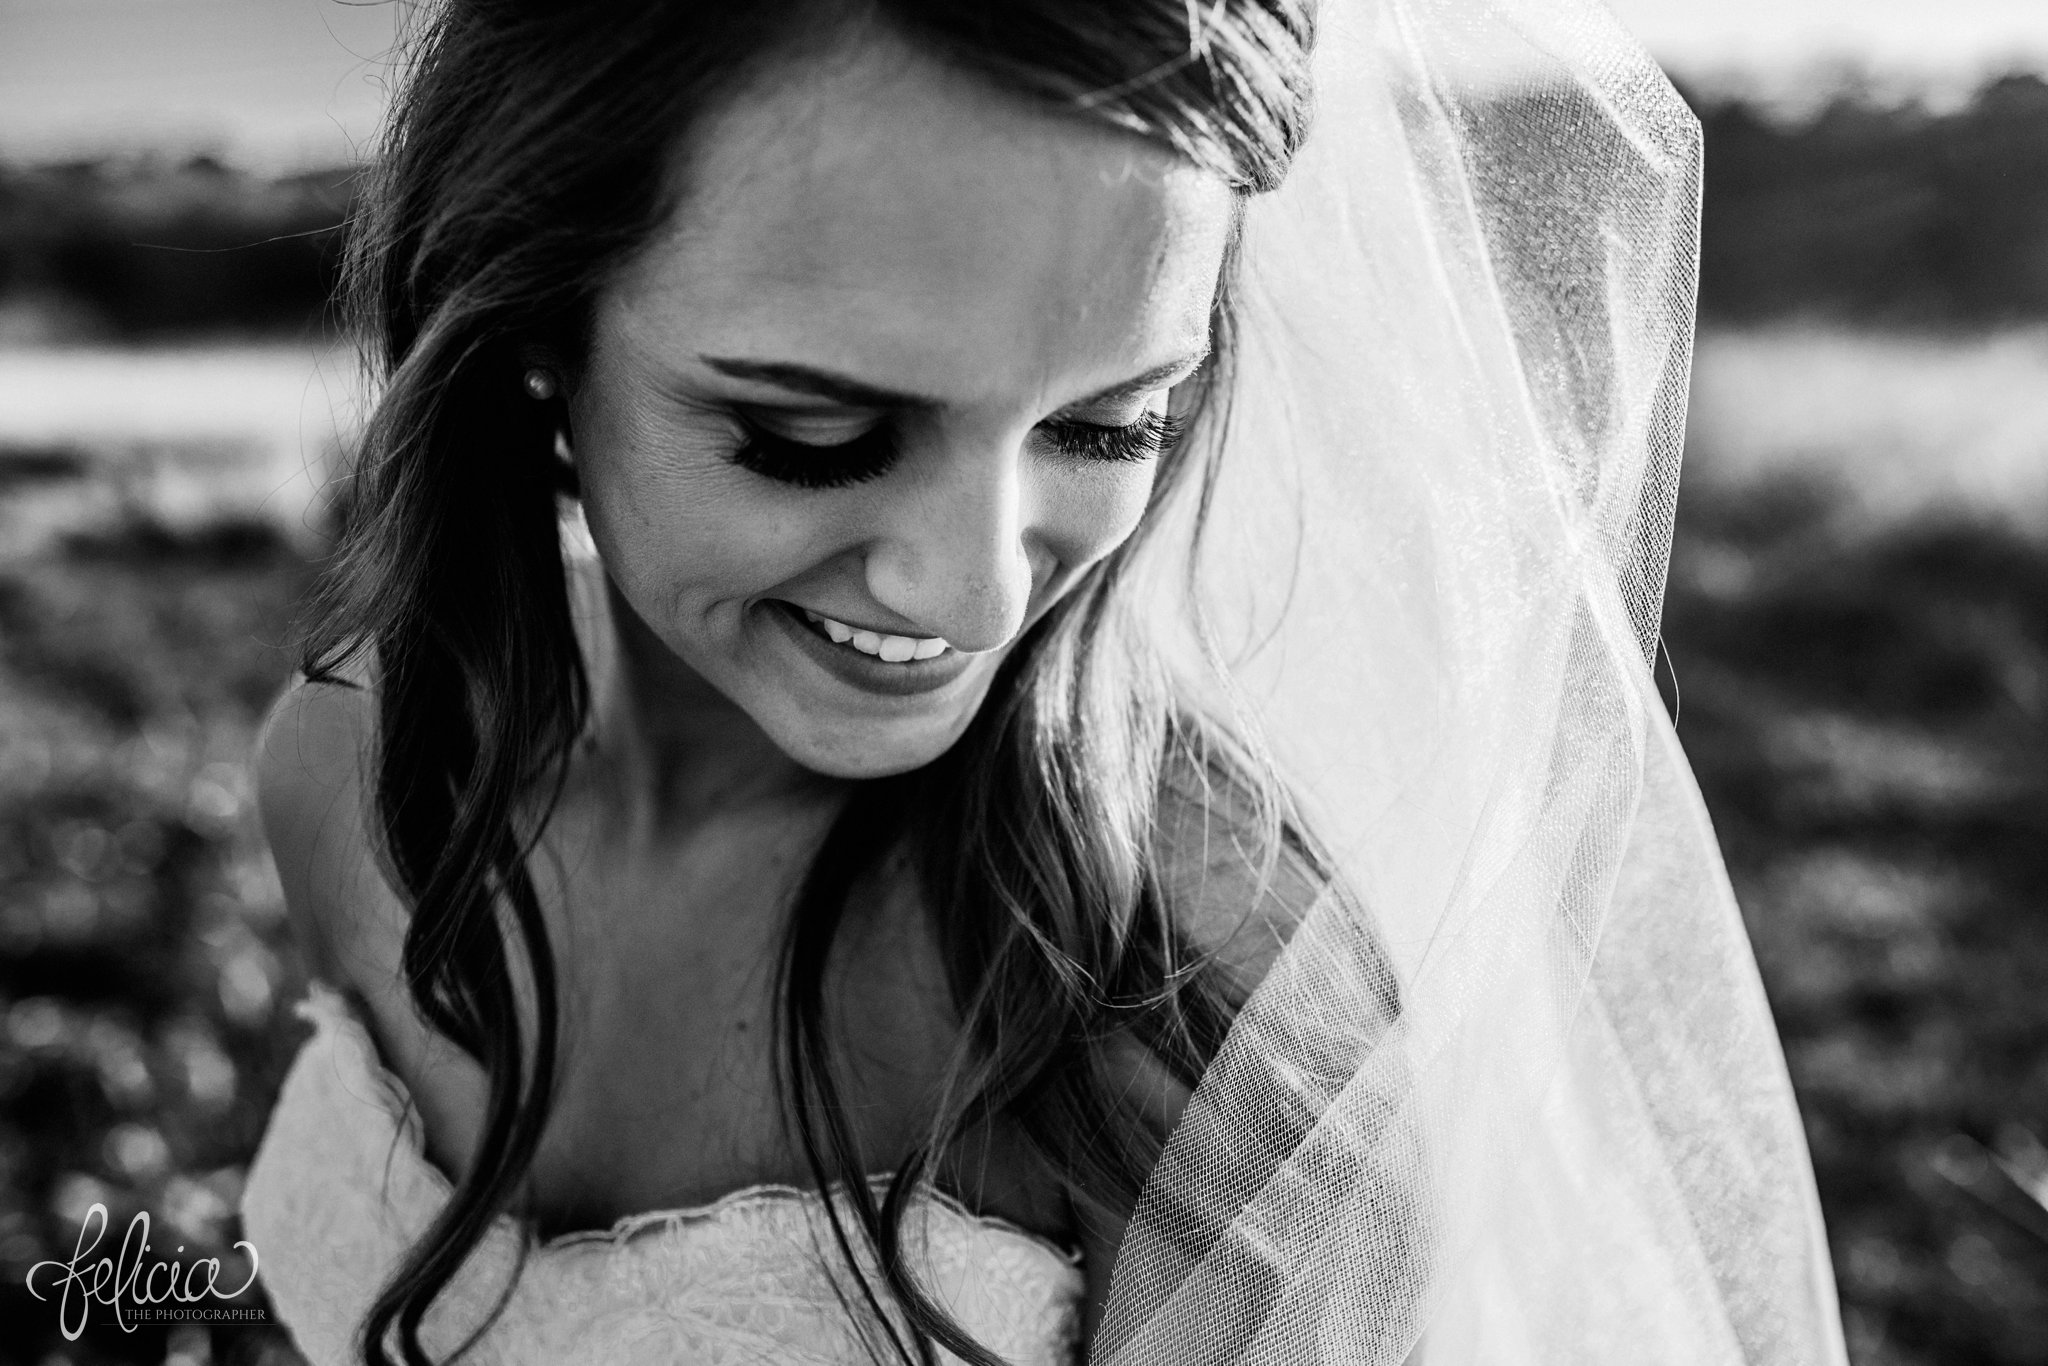 black and white | wedding | wedding photos | Rumely Event Space | wedding photography | images by feliciathephotographer.com | field background | nature | bride portrait | sunlight | smiling bride | bride solo shot | Paradise Makeup, Hair, and Airbrush Tanning | head shot 